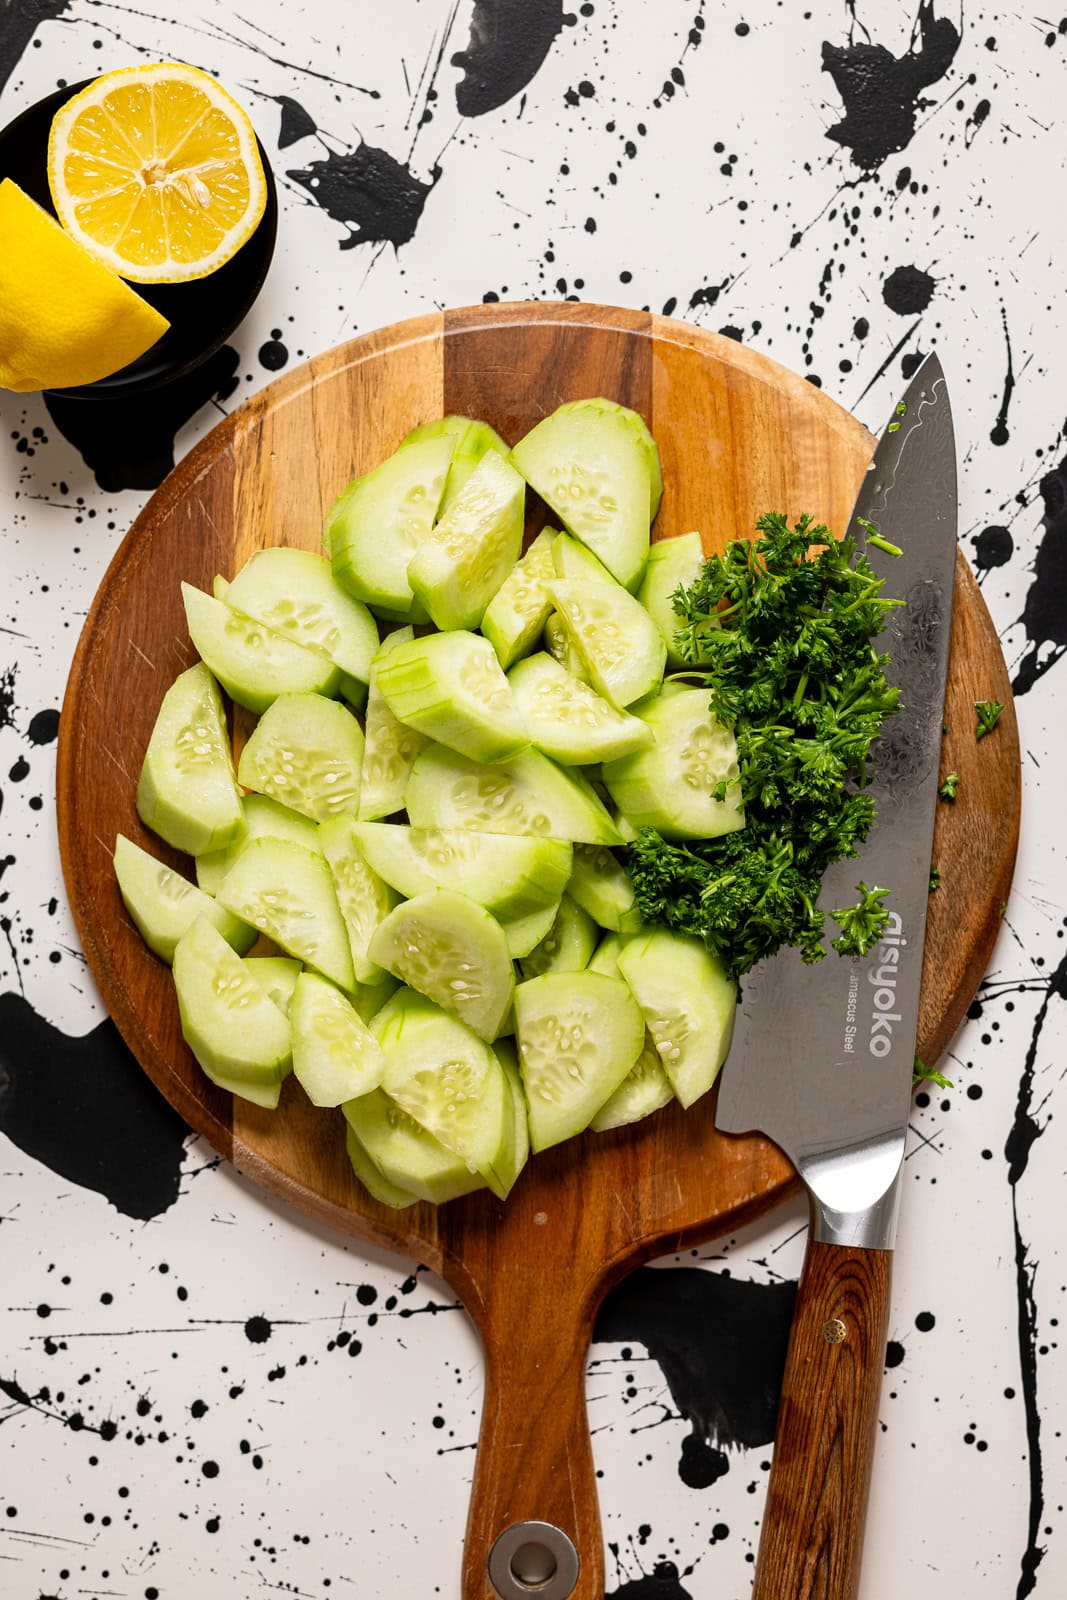 Cucumber and parsley chopped on a cutting board with a knife.